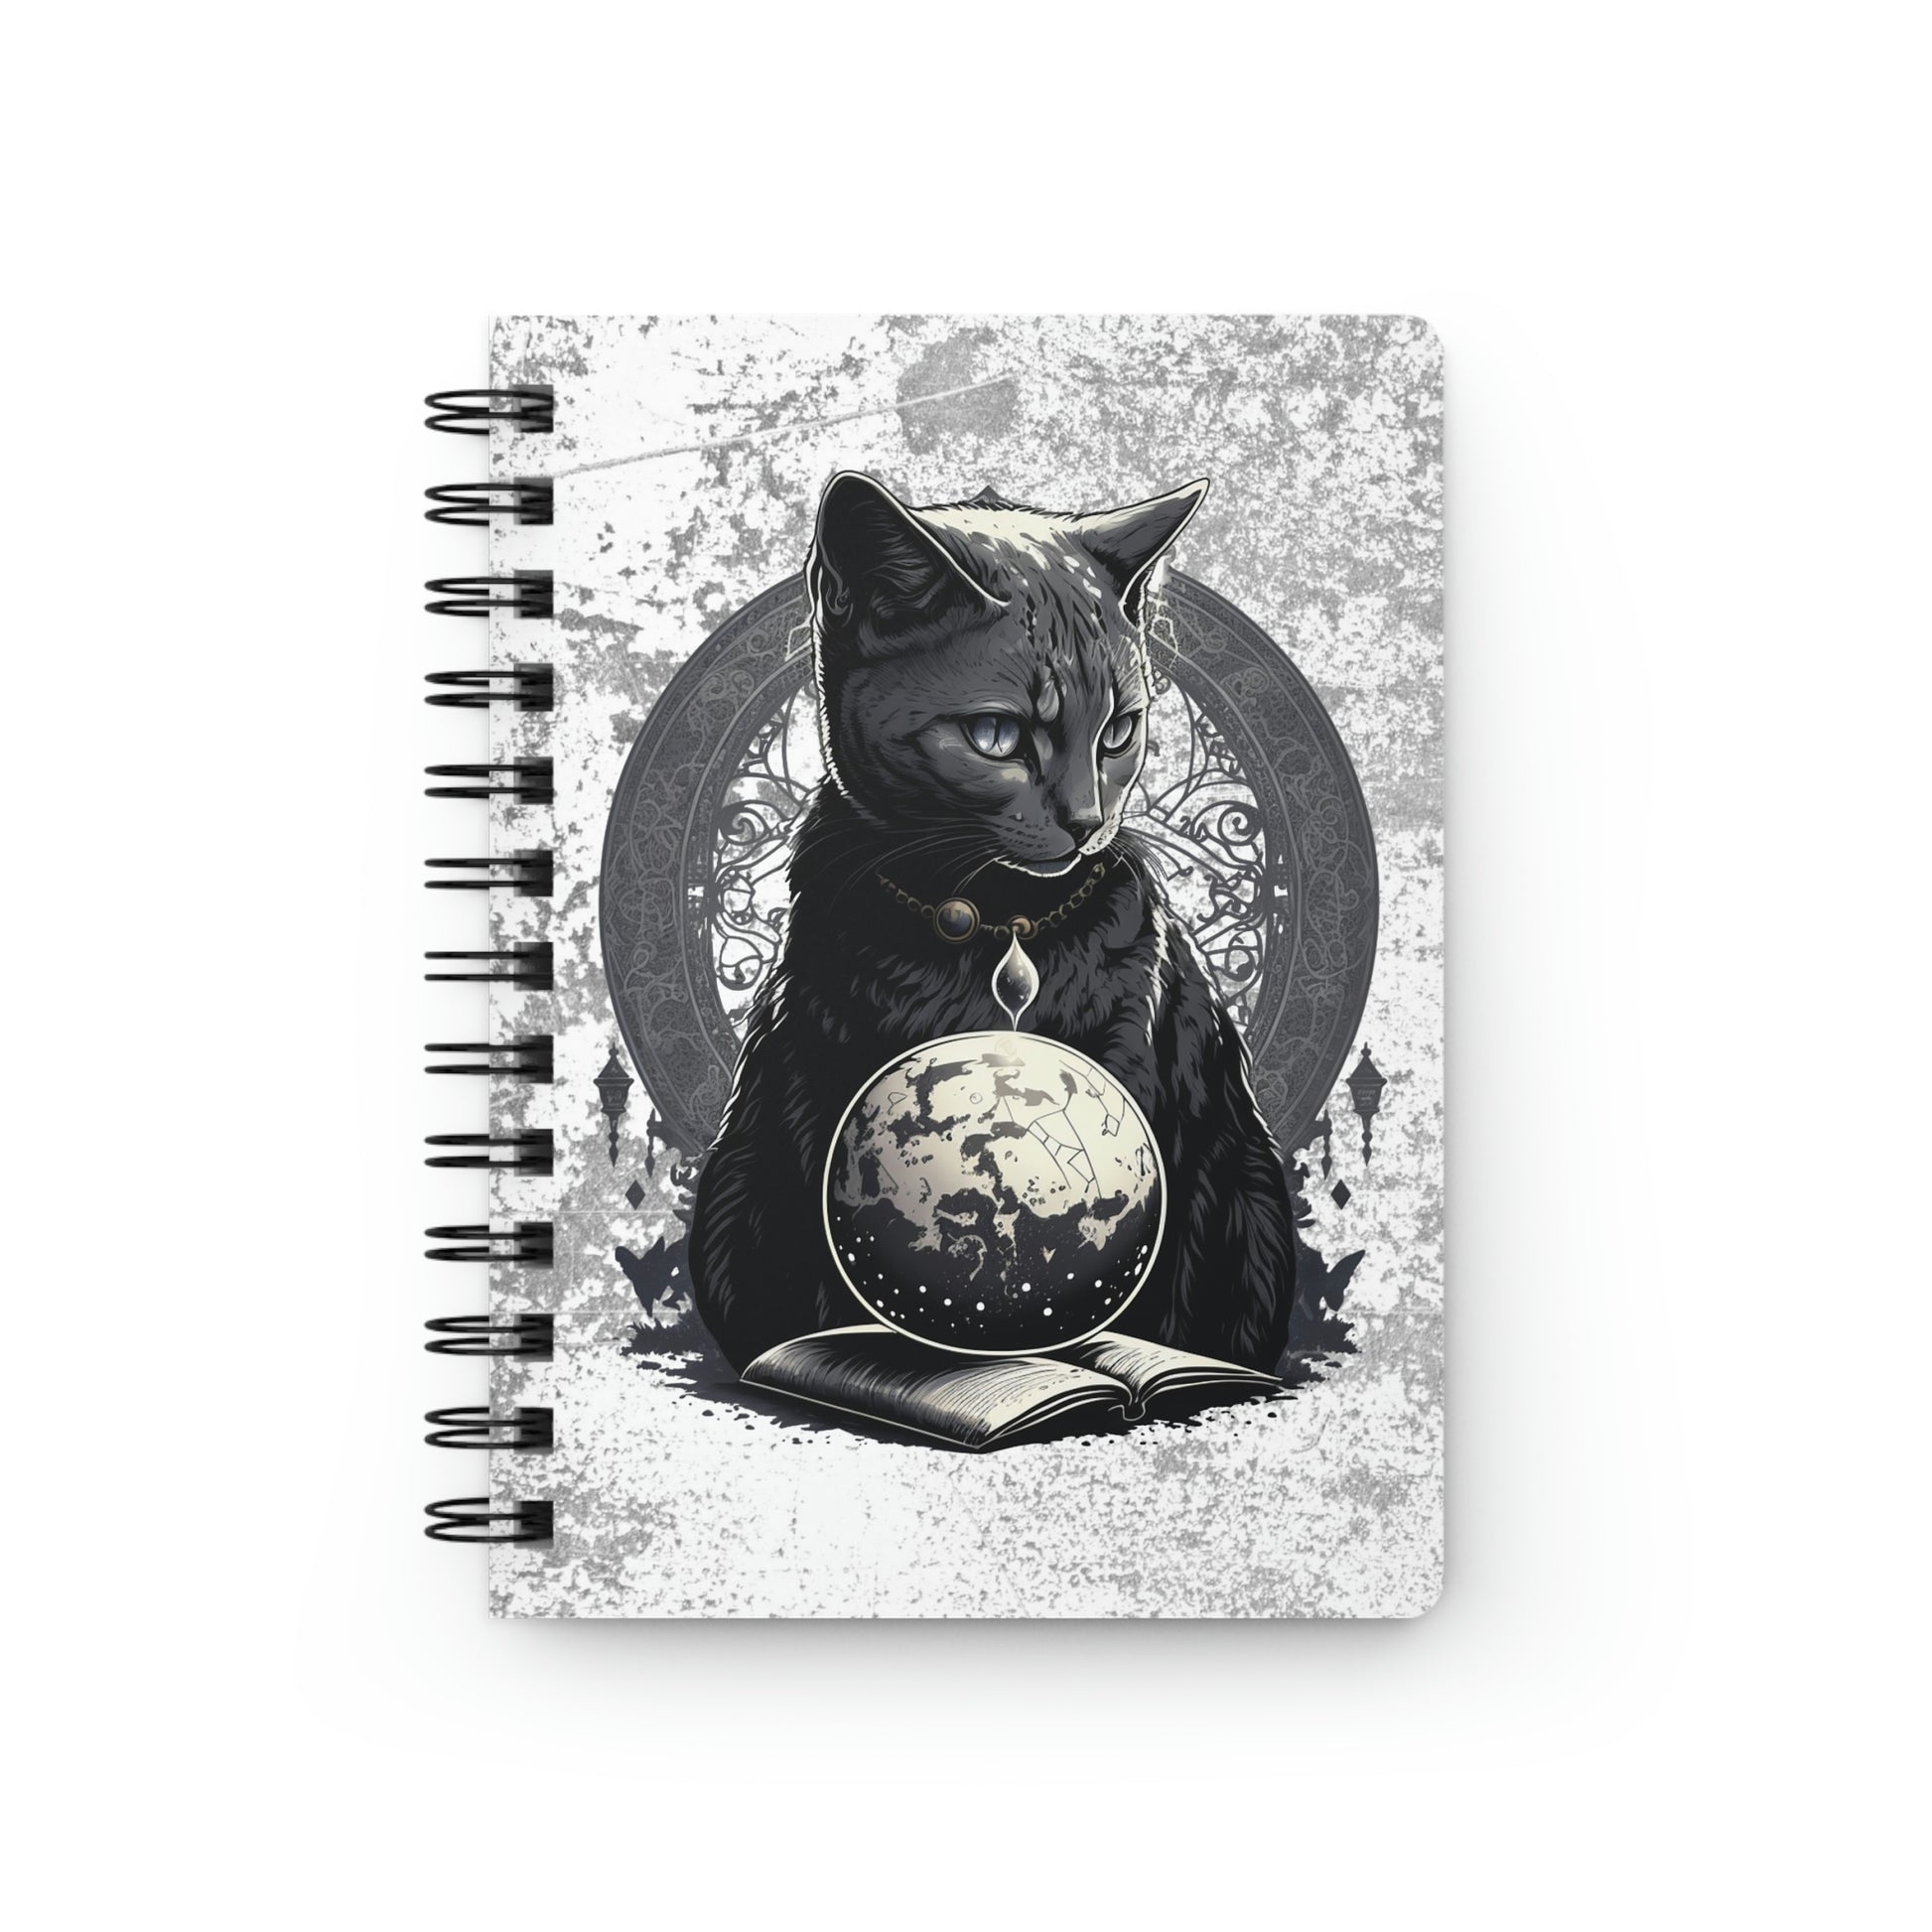 Cosmic Cat Spiral Bound Journal, cat magician notebook, magical journal, witchy gothic cat journal, whimsical celestial fantasy notebook